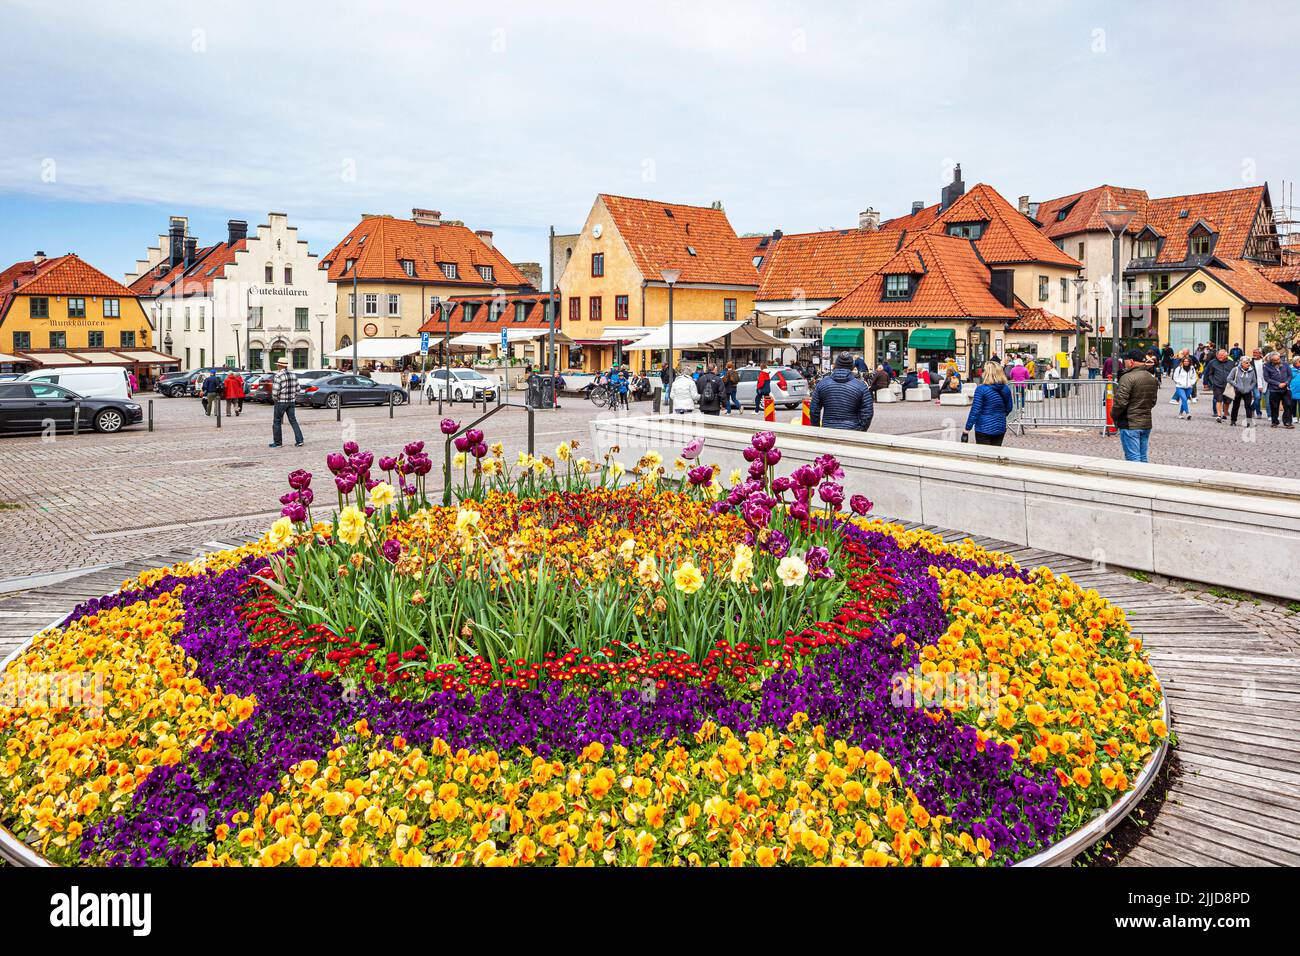 Floral displays in the Great Square (Stora Torget) in the medieval town of Visby on the island of Gotland in the Baltic Sea off Sweden Stock Photo